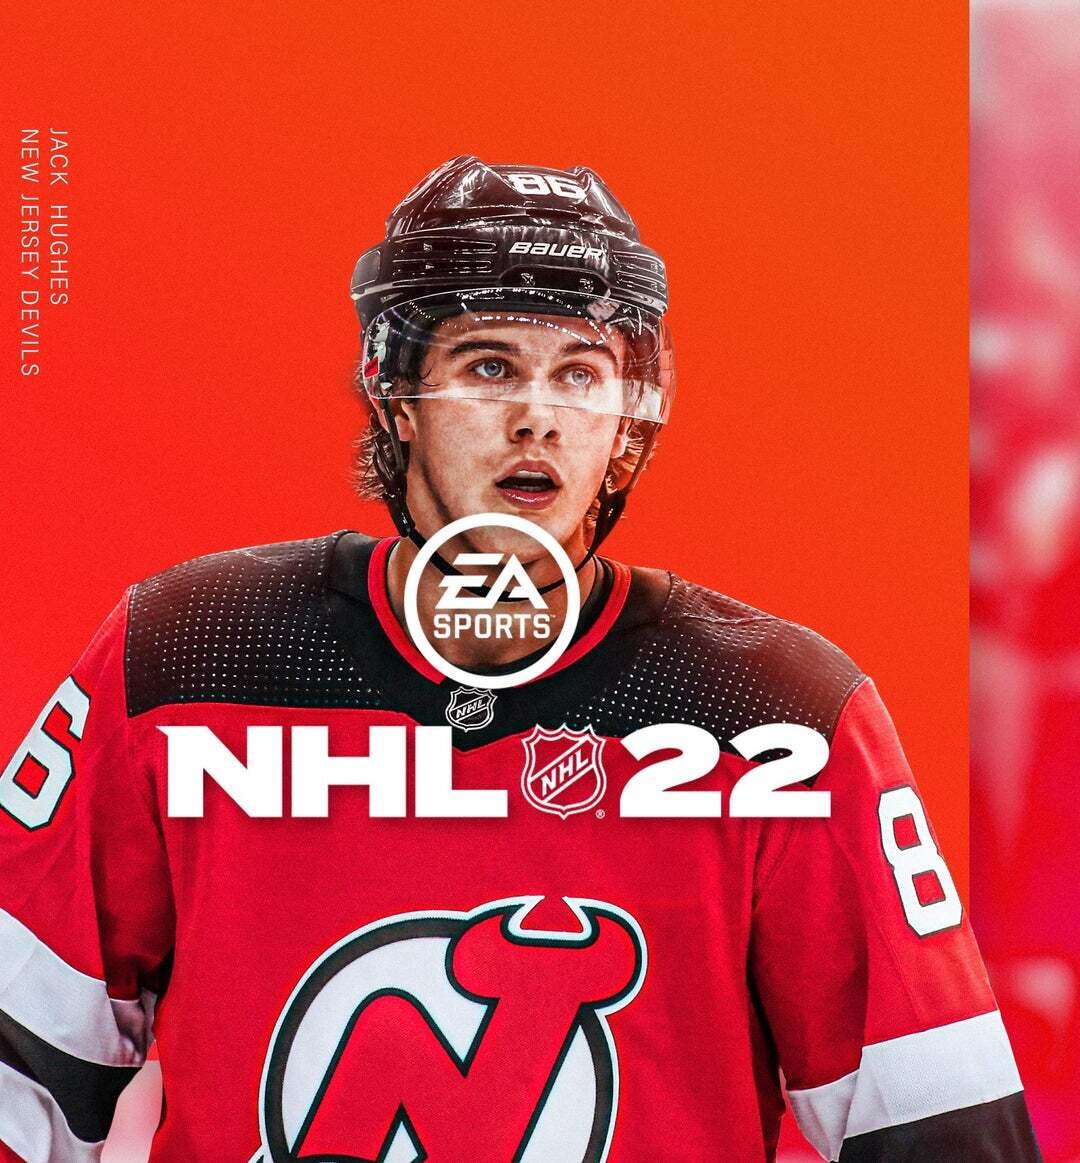 NHL 22 2022 Draft /Offseason Roster Update (Xbox Series X/S